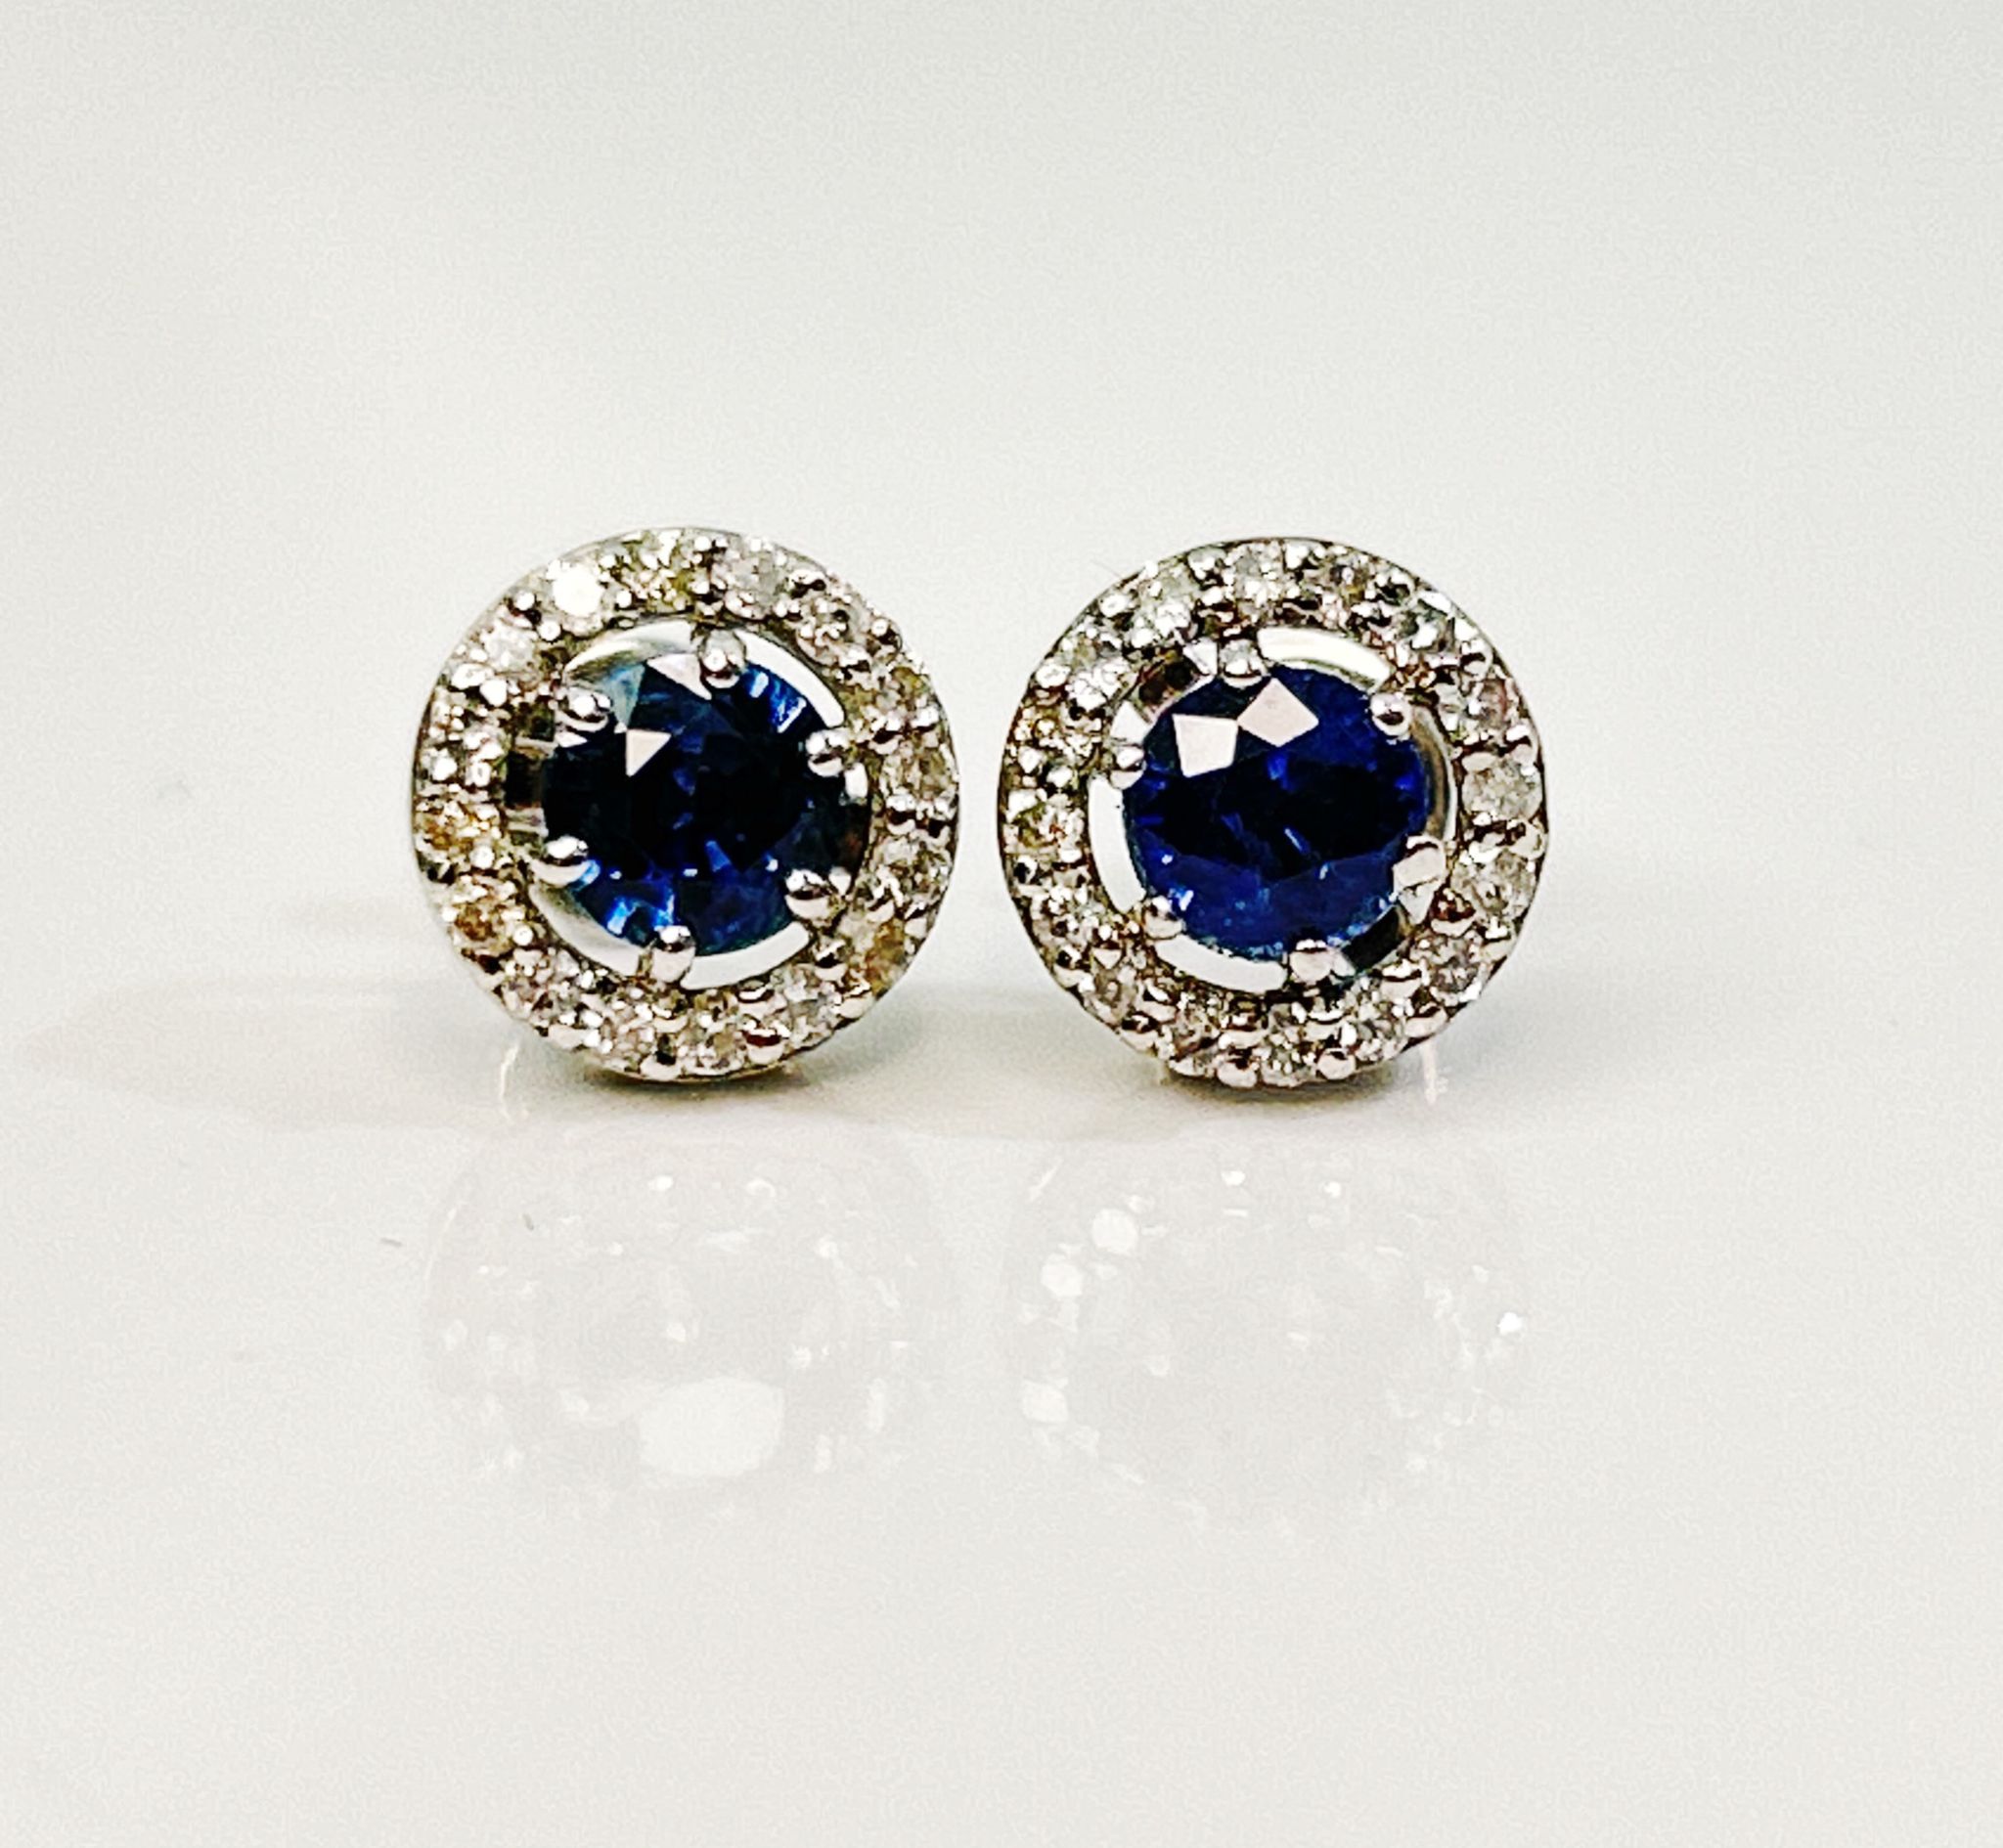 Beautiful Natural Unheated Blue Sapphire Earrings With Diamonds & Platinum - Image 4 of 6